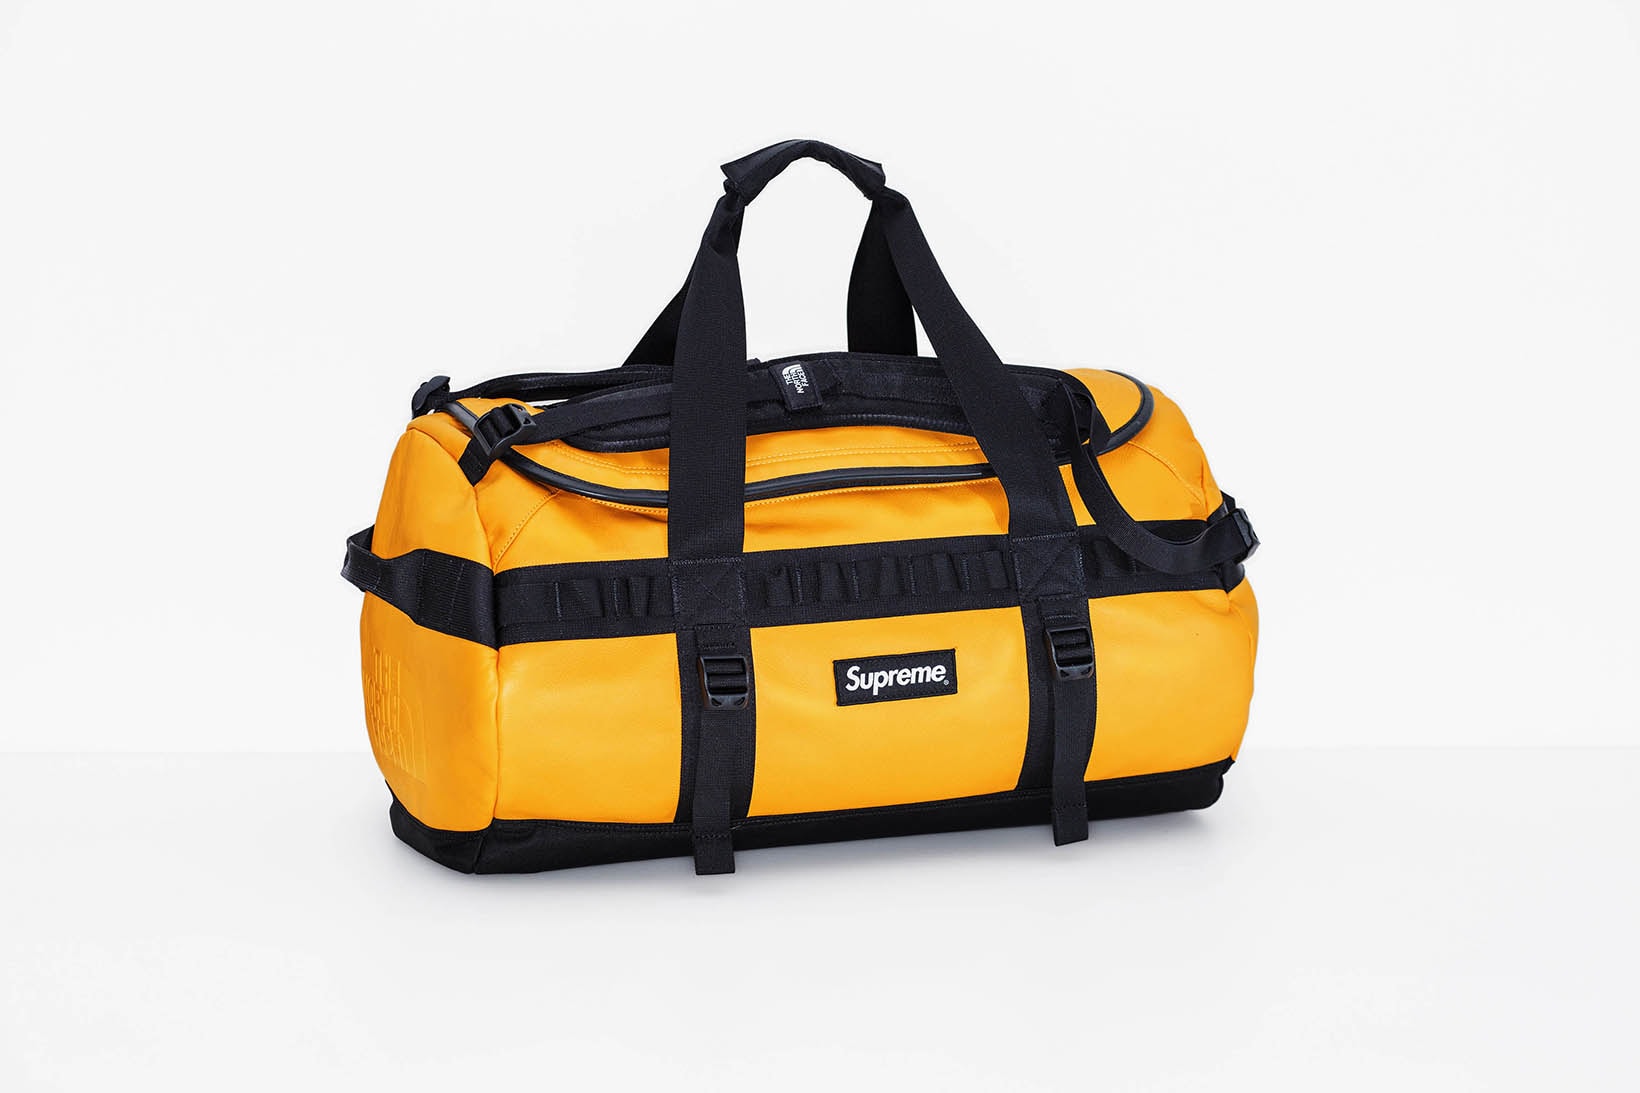 Supreme x The North Face 2017 Fall Yellow Duffel